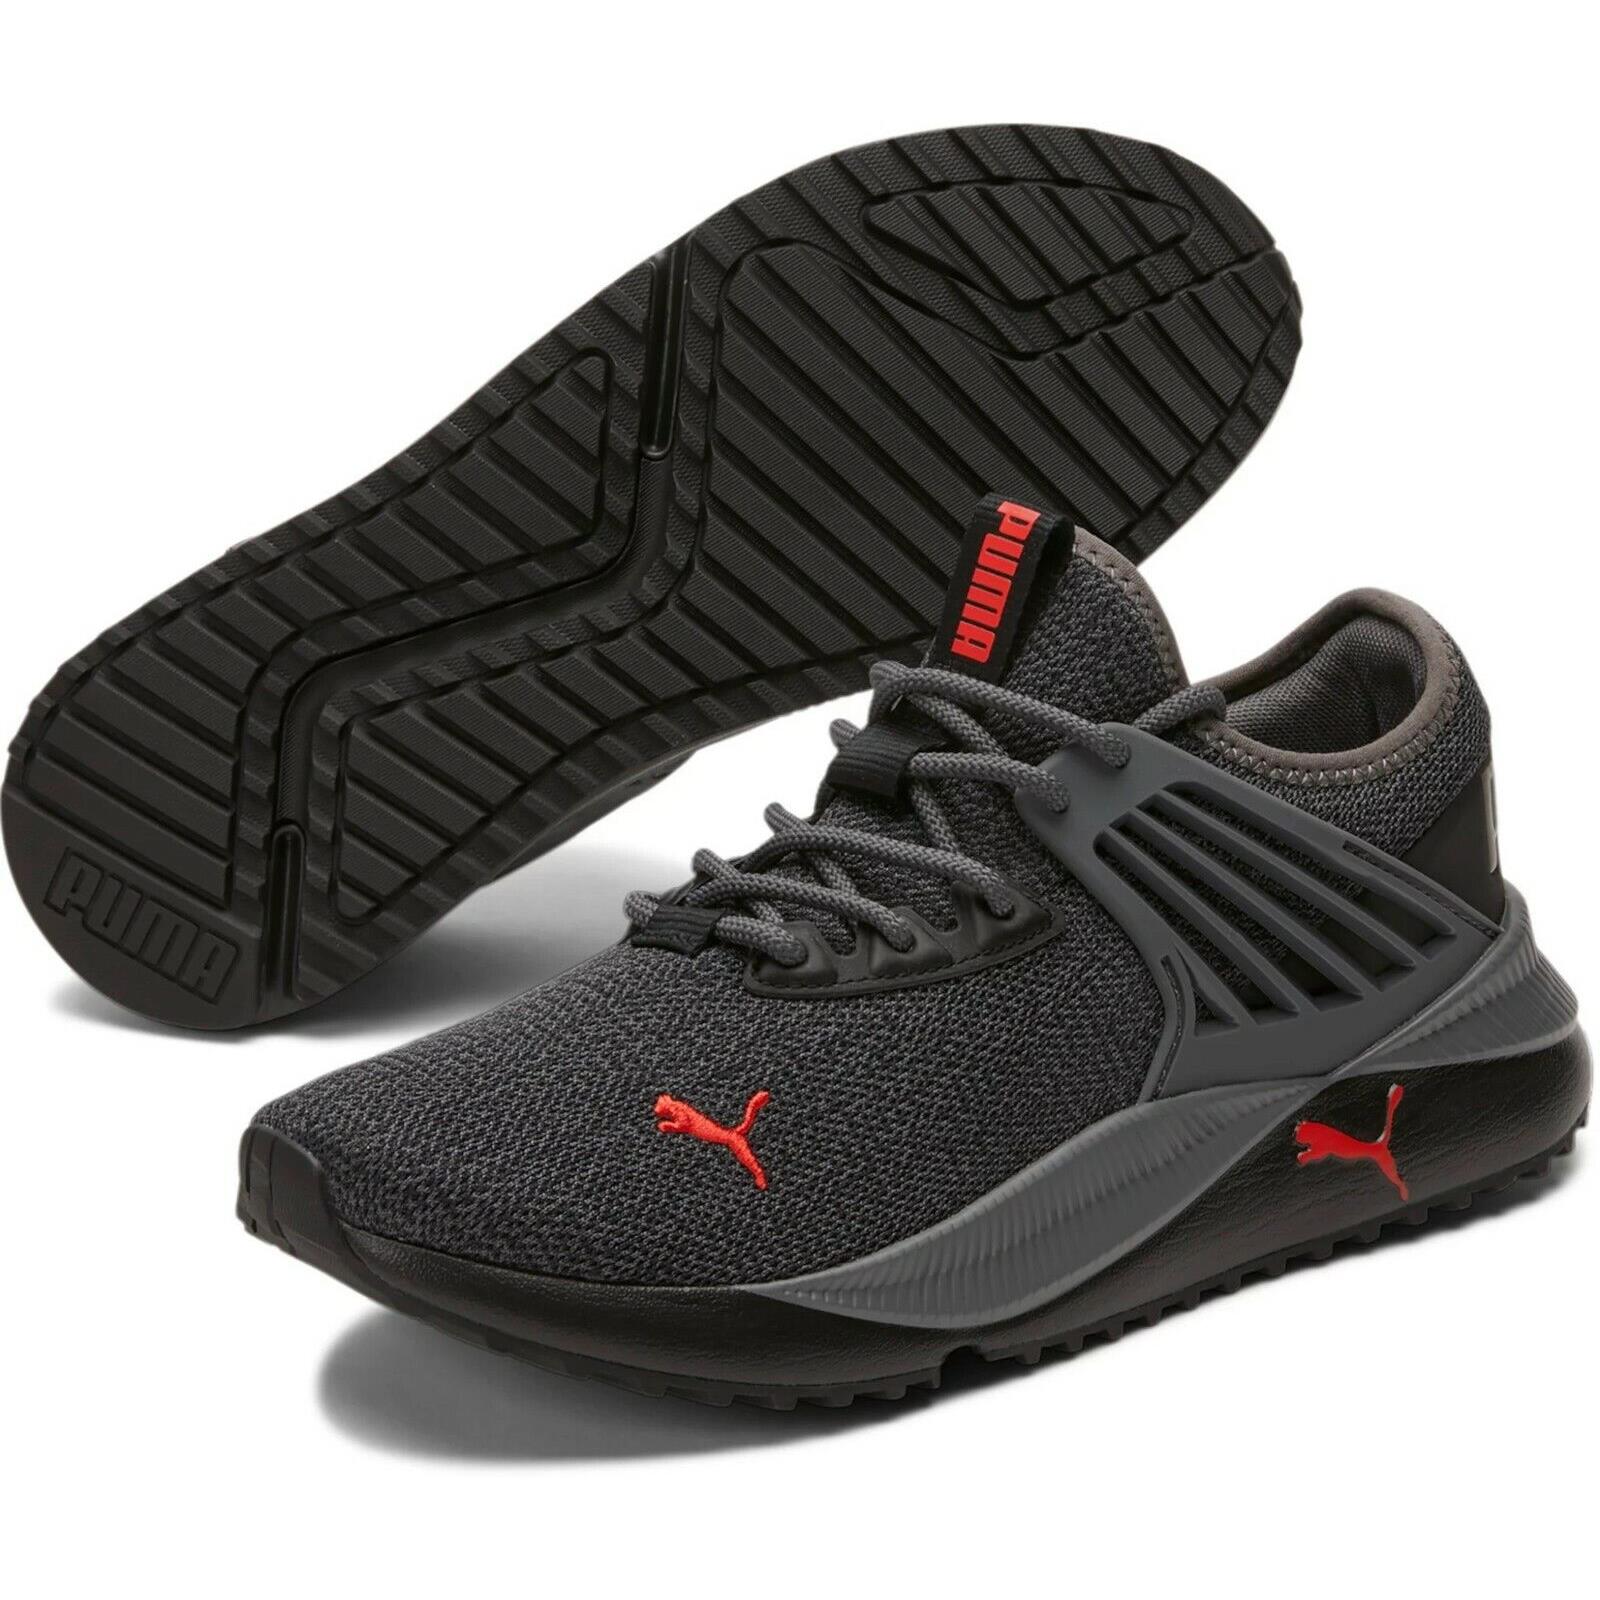 Puma Pacer Future Knit Casual Men`s Shoe Black - Red US Size - BLACK - RED